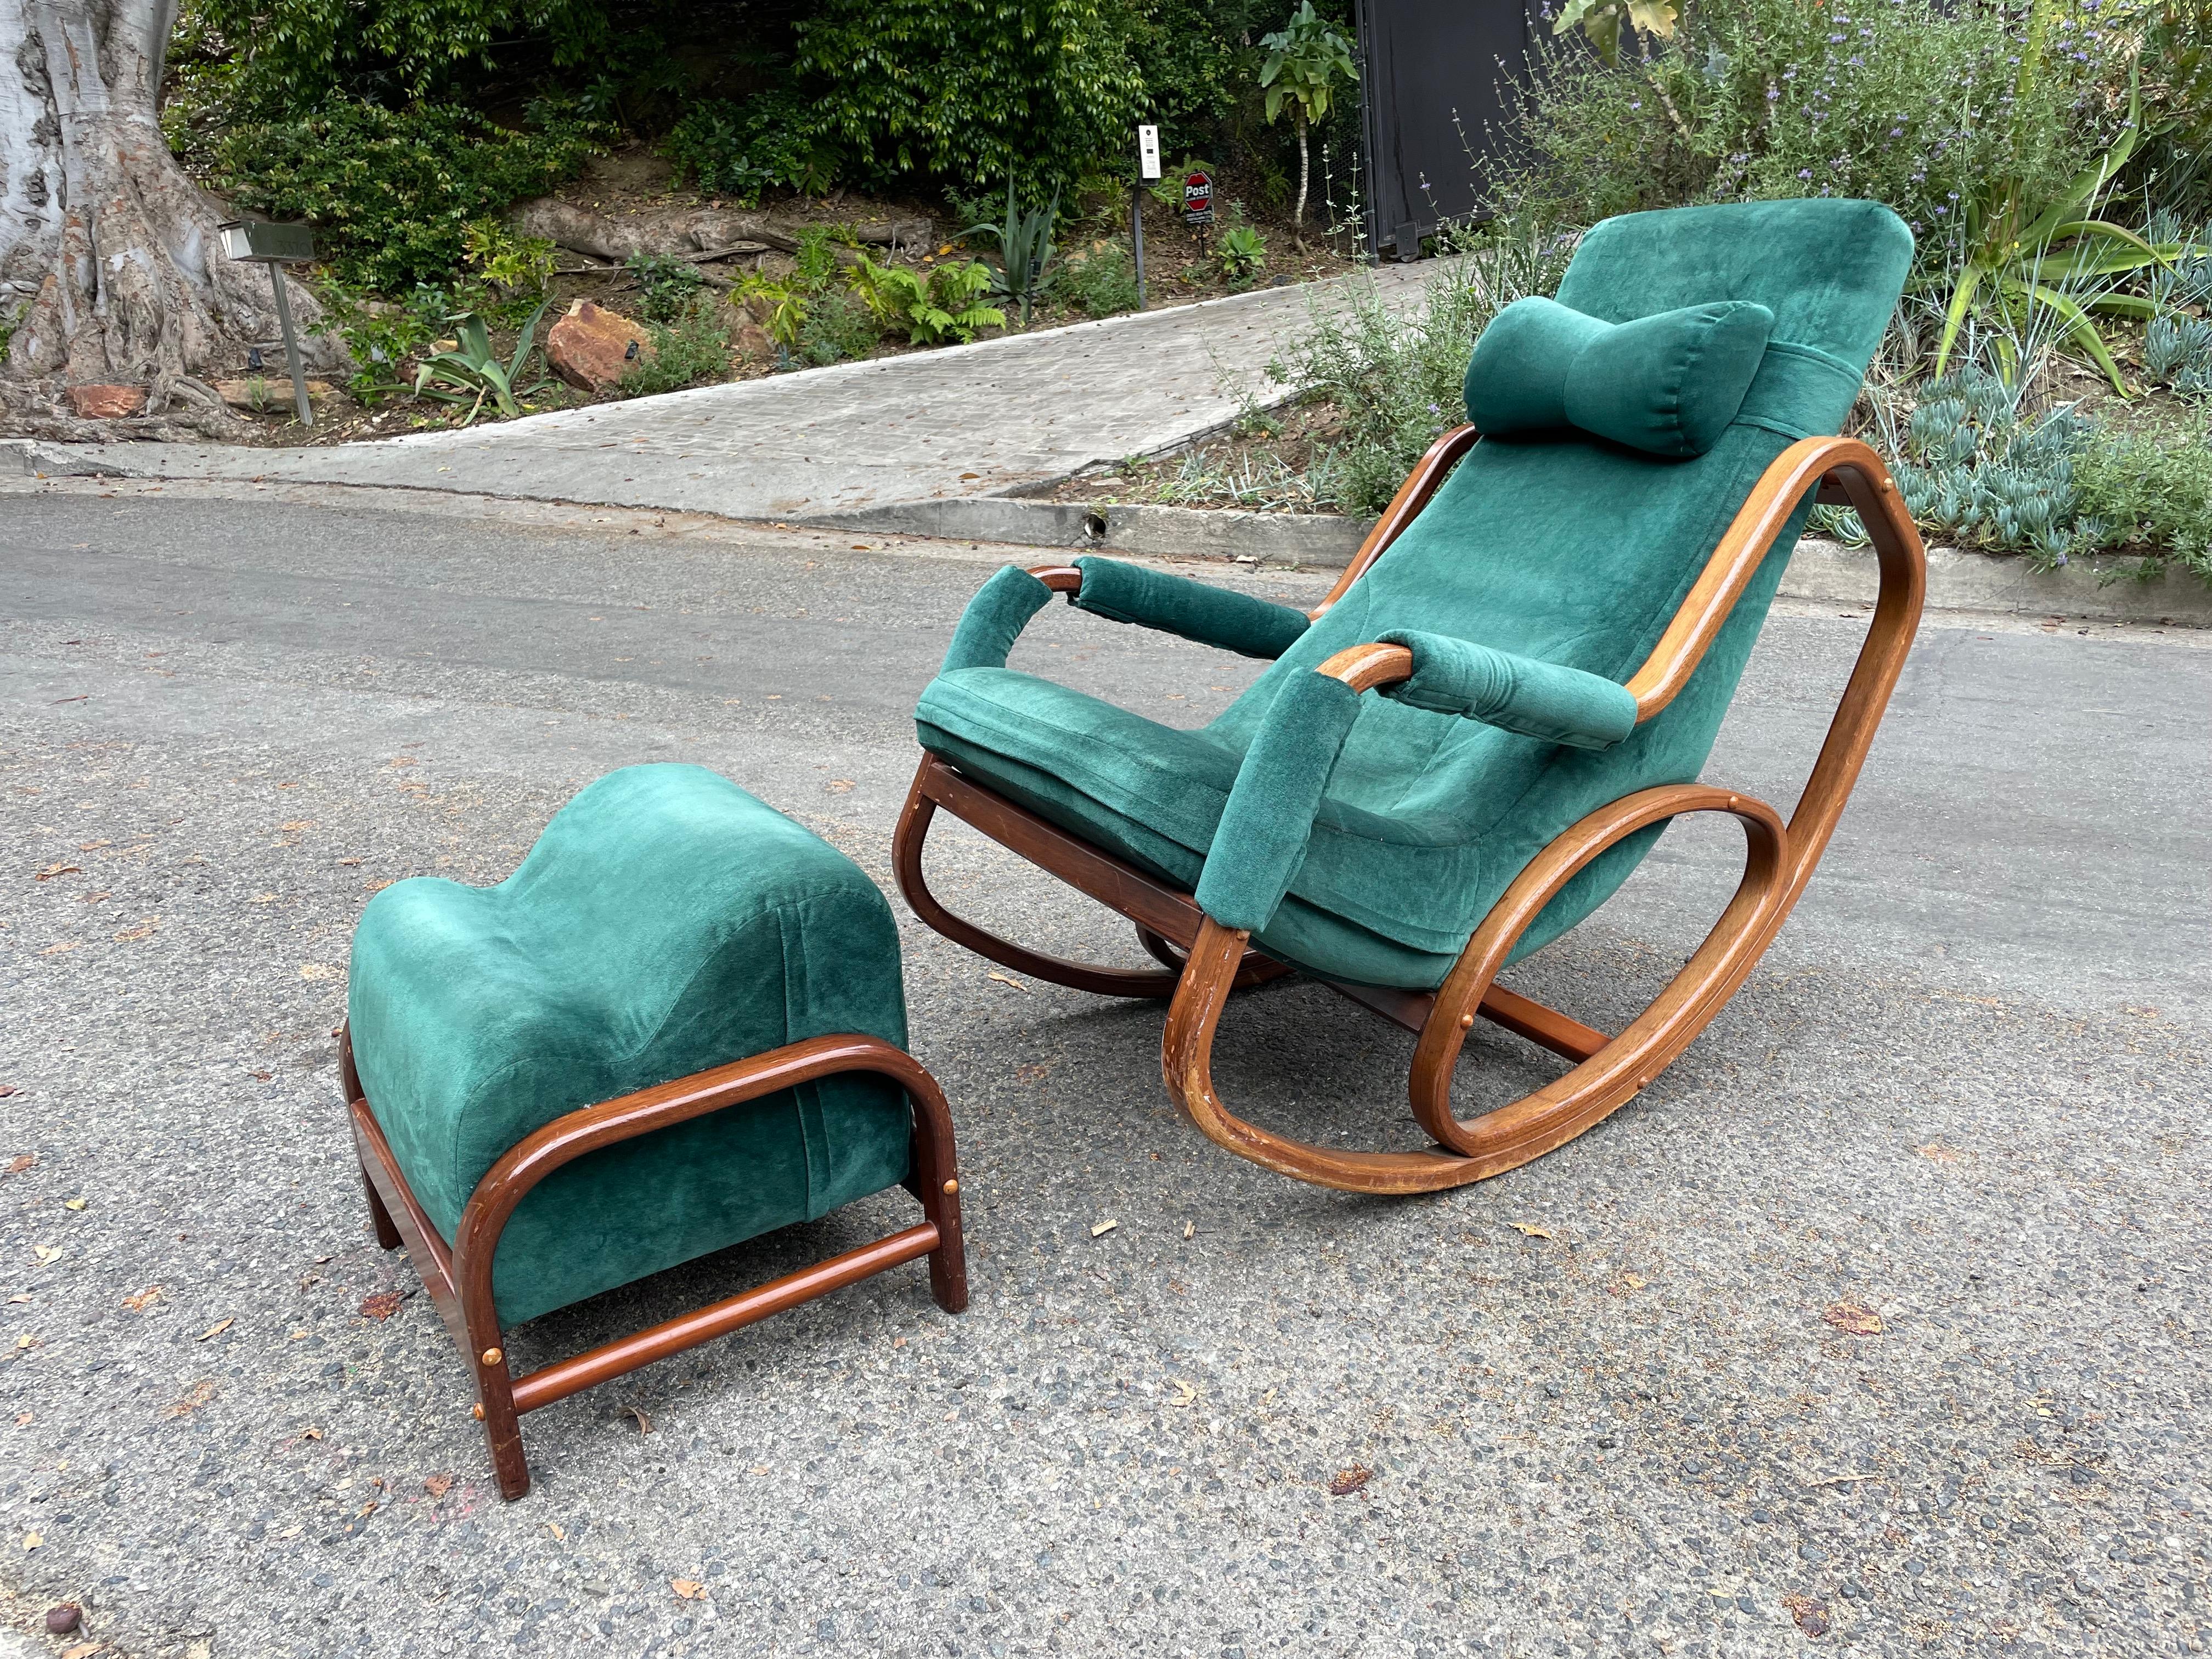 Stunning Danish Modern rocking chair with round lines and bentwood. In the manner of Thonet, Josef Hoffman, Tendo Mokko and Kofod Larsen.

The chair features its original bow-tie shaped head rest and is upholstered in a rich green velvet. The rare